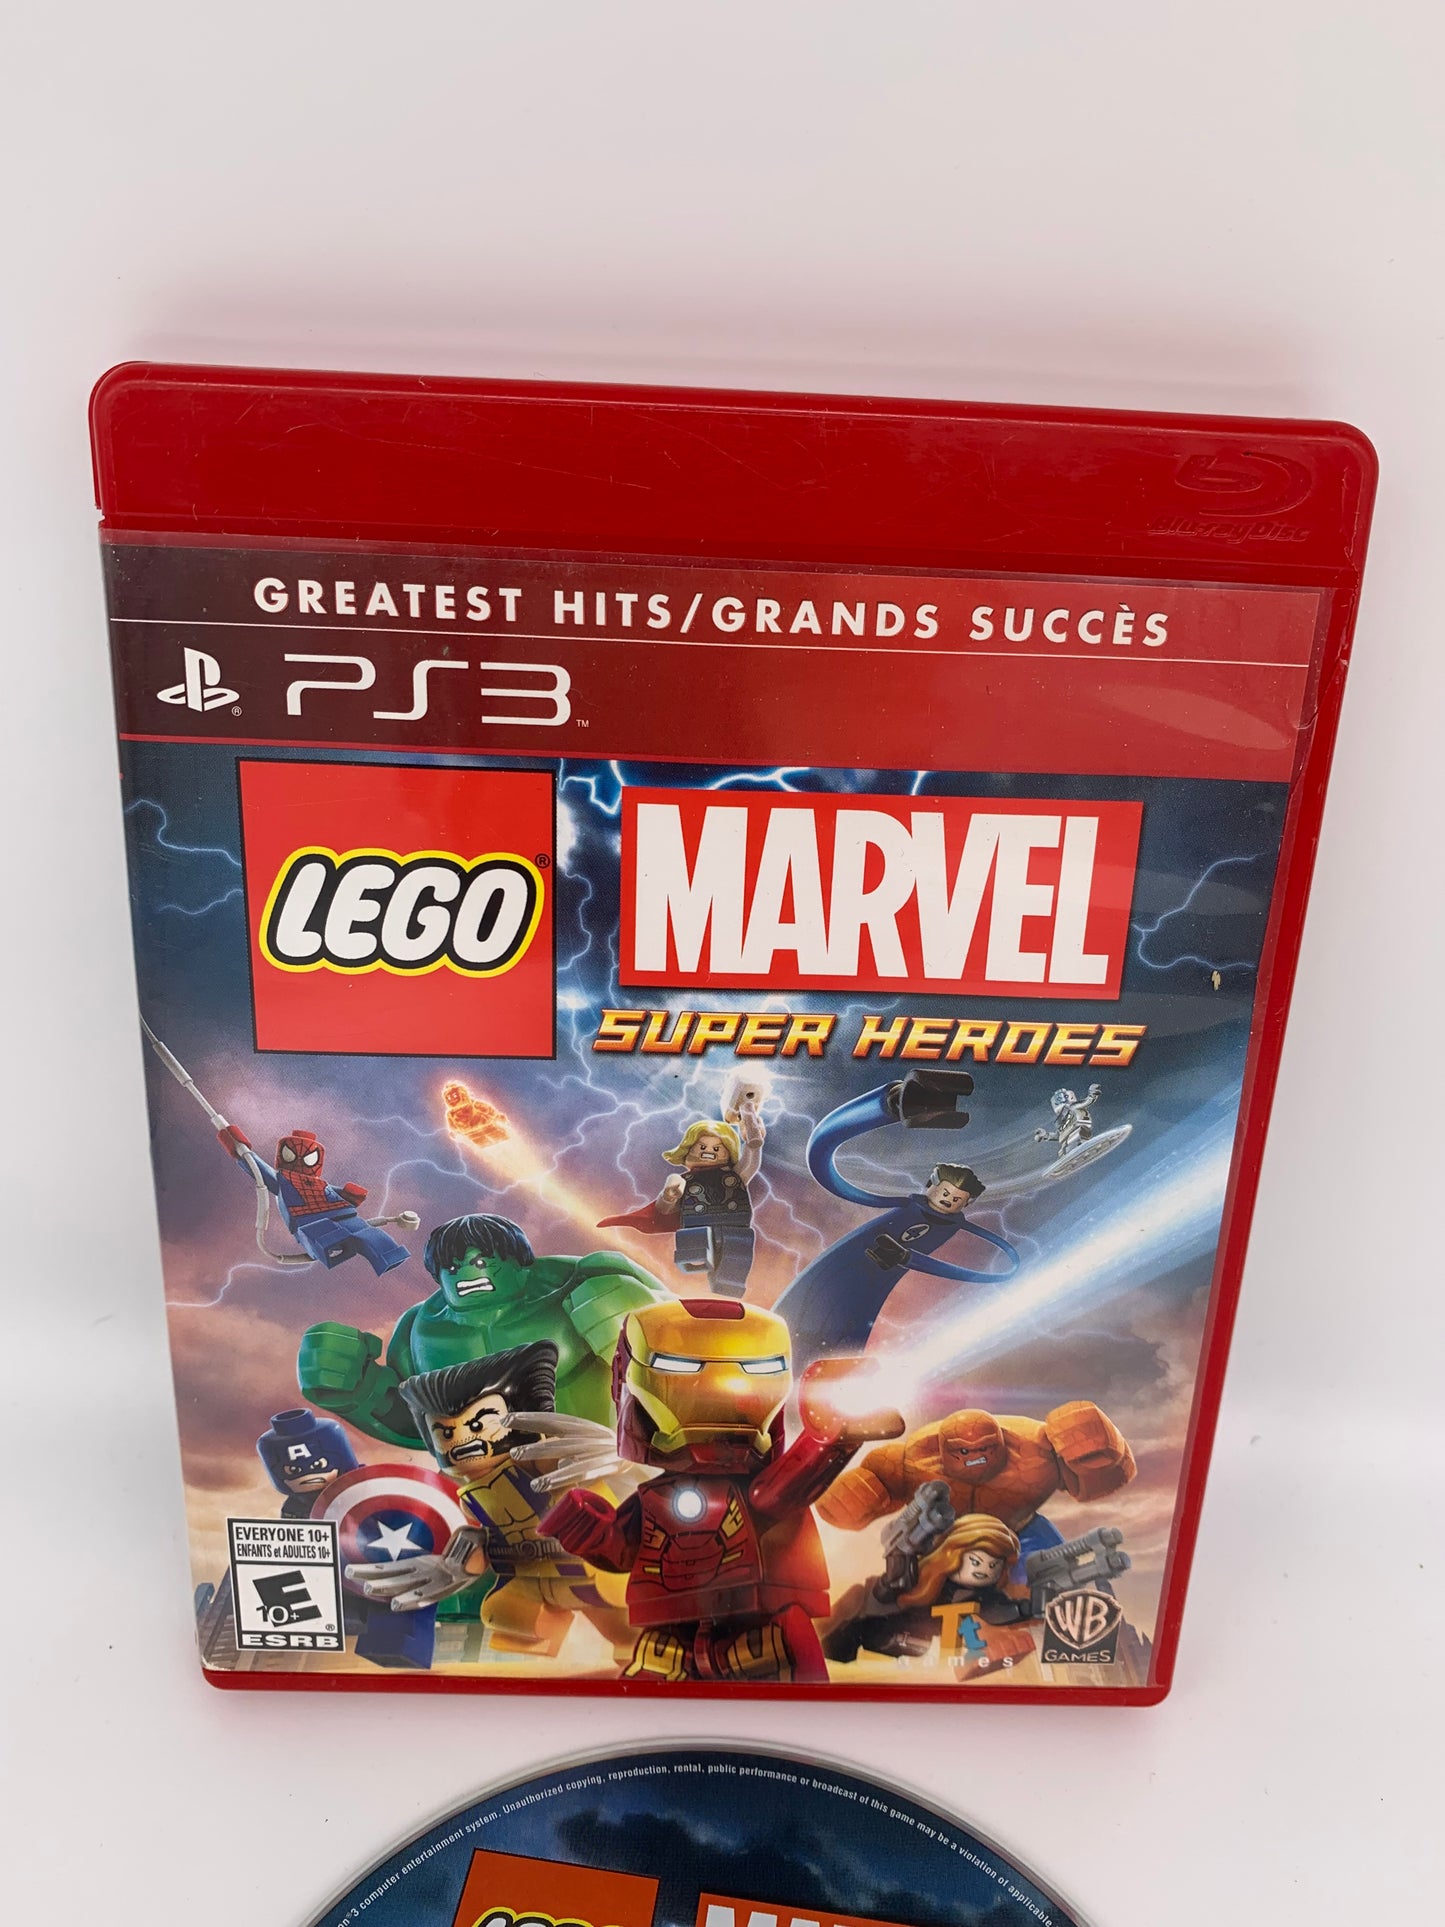 SONY PLAYSTATiON 3 [PS3] | LEGO MARVEL SUPER HEROES | GREATEST HiTS